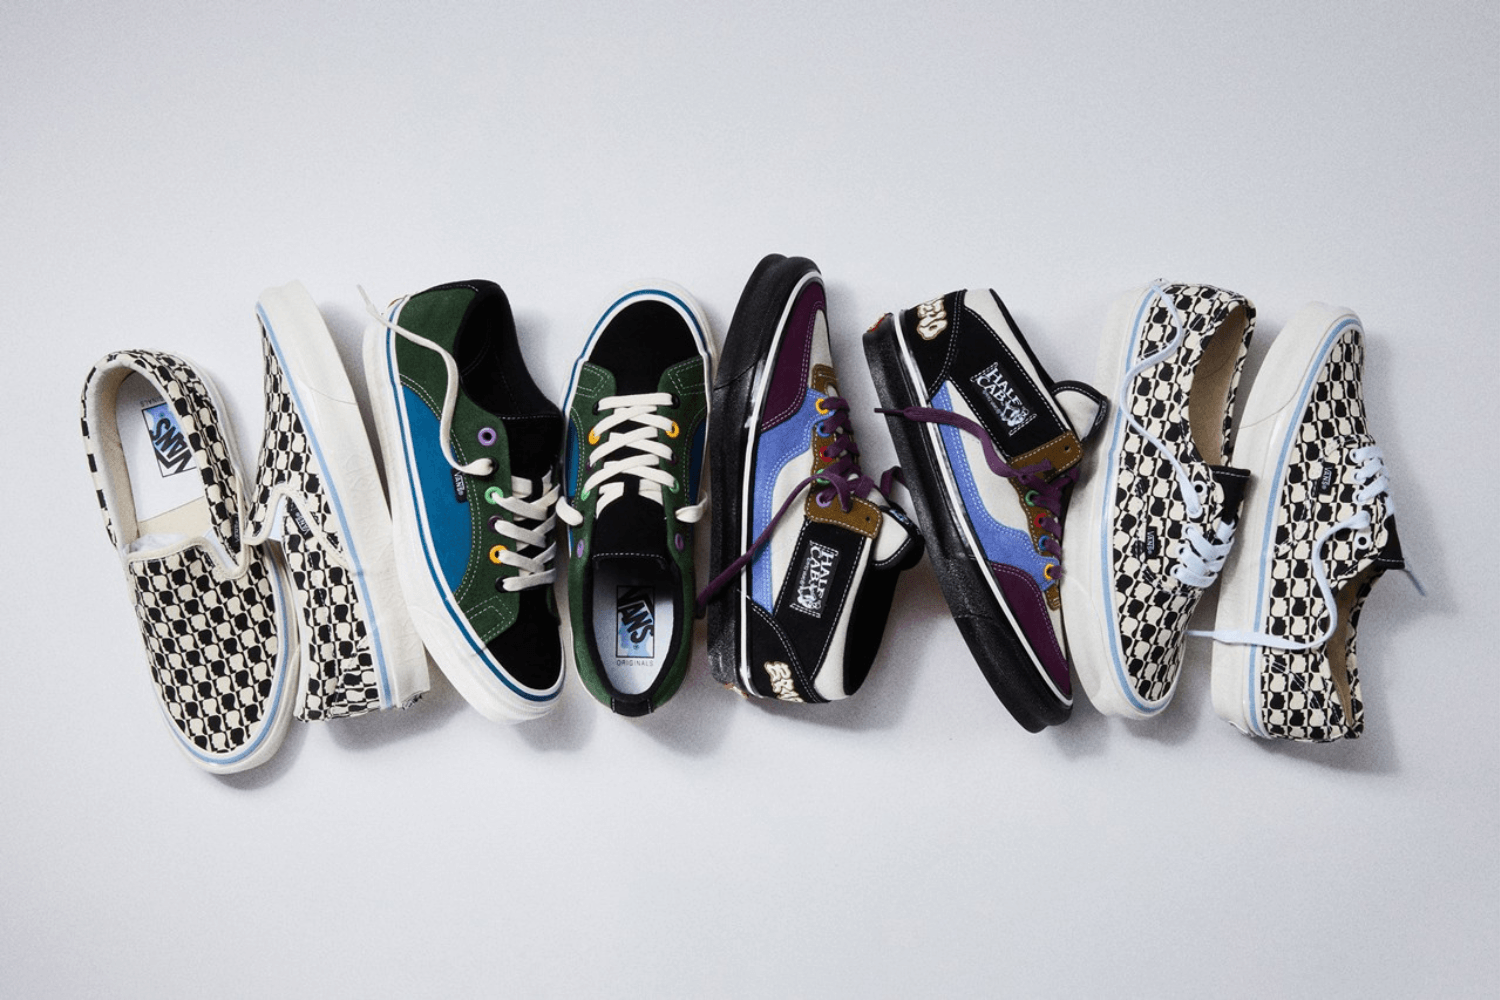 The Brain Dead x Vault by Vans collection will drop soon